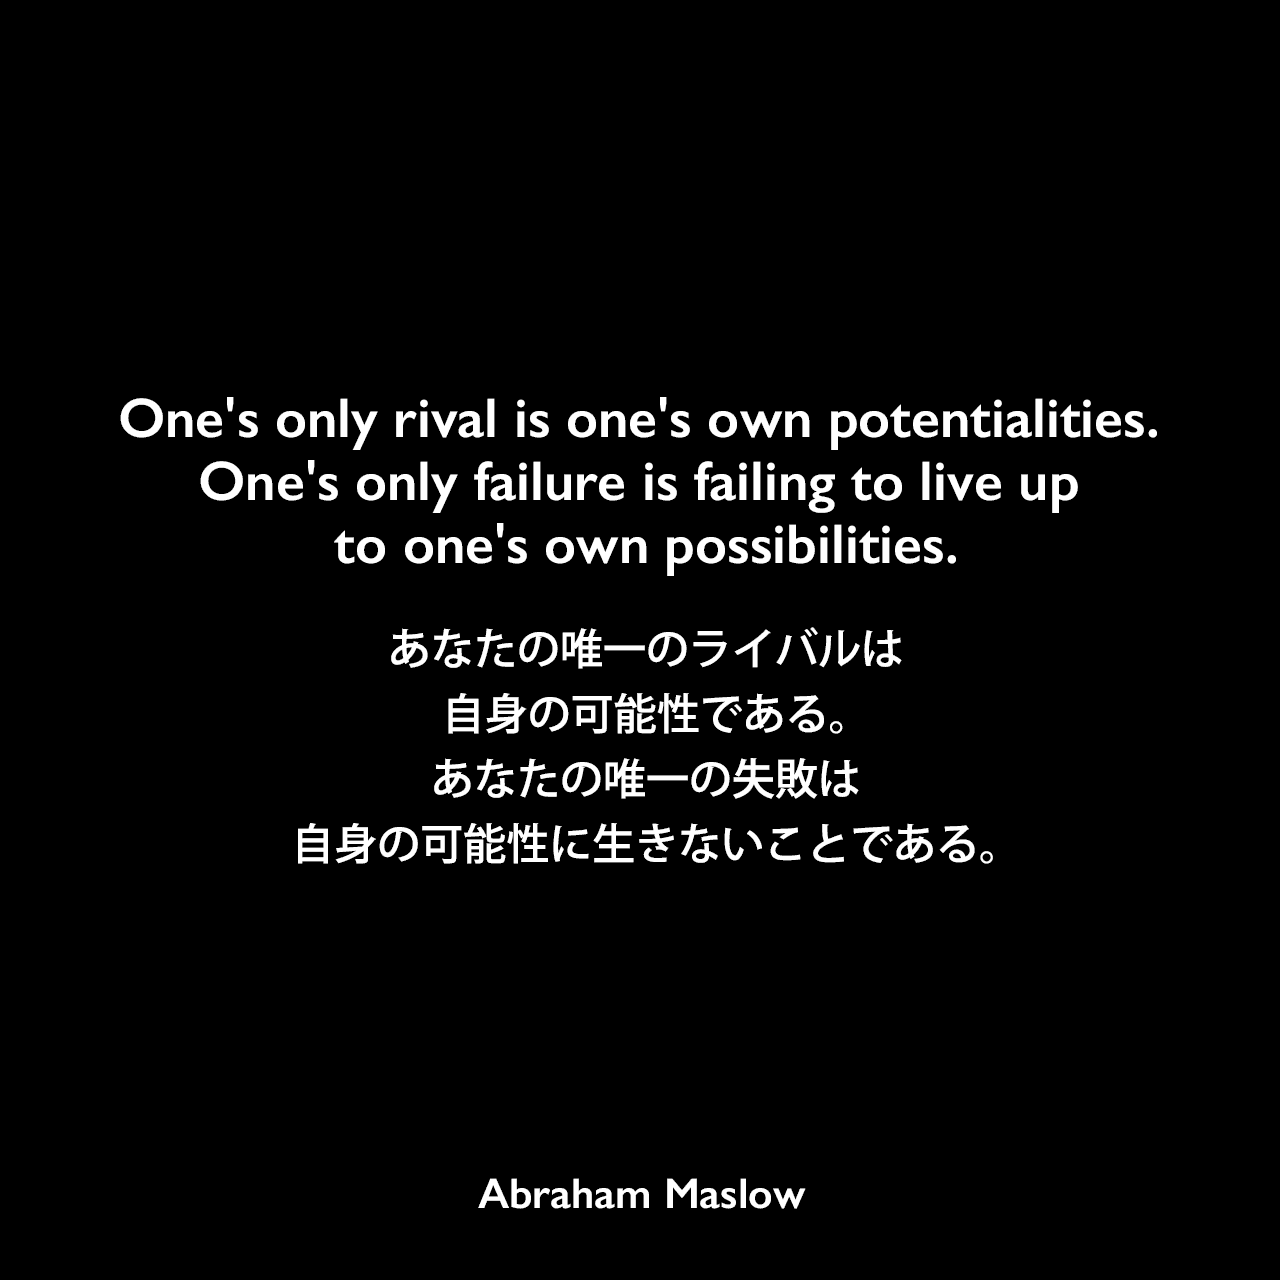 One's only rival is one's own potentialities. One's only failure is failing to live up to one's own possibilities.あなたの唯一のライバルは自身の可能性である。あなたの唯一の失敗は自身の可能性に生きないことである。Abraham Maslow